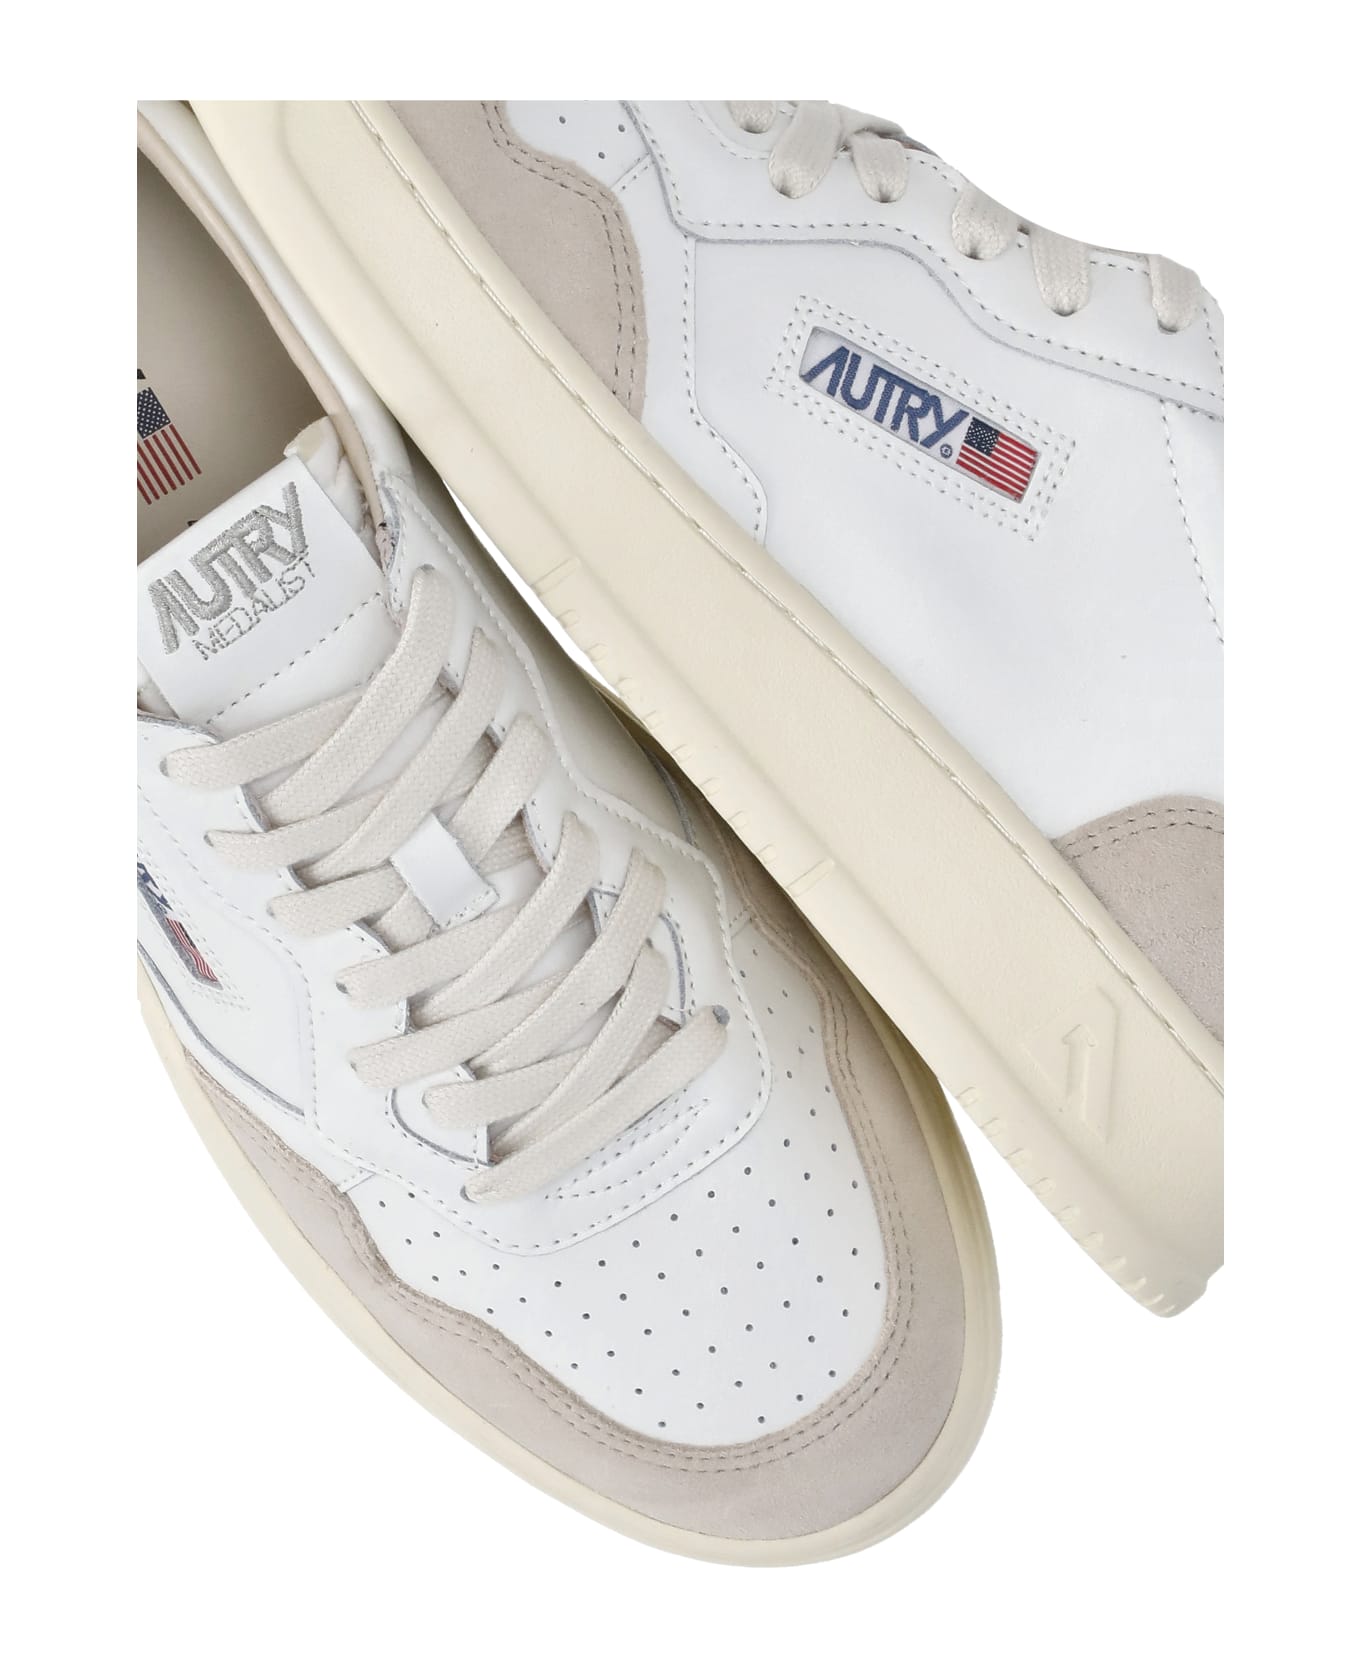 Autry Aulm Ls21 Sneakers - White スニーカー